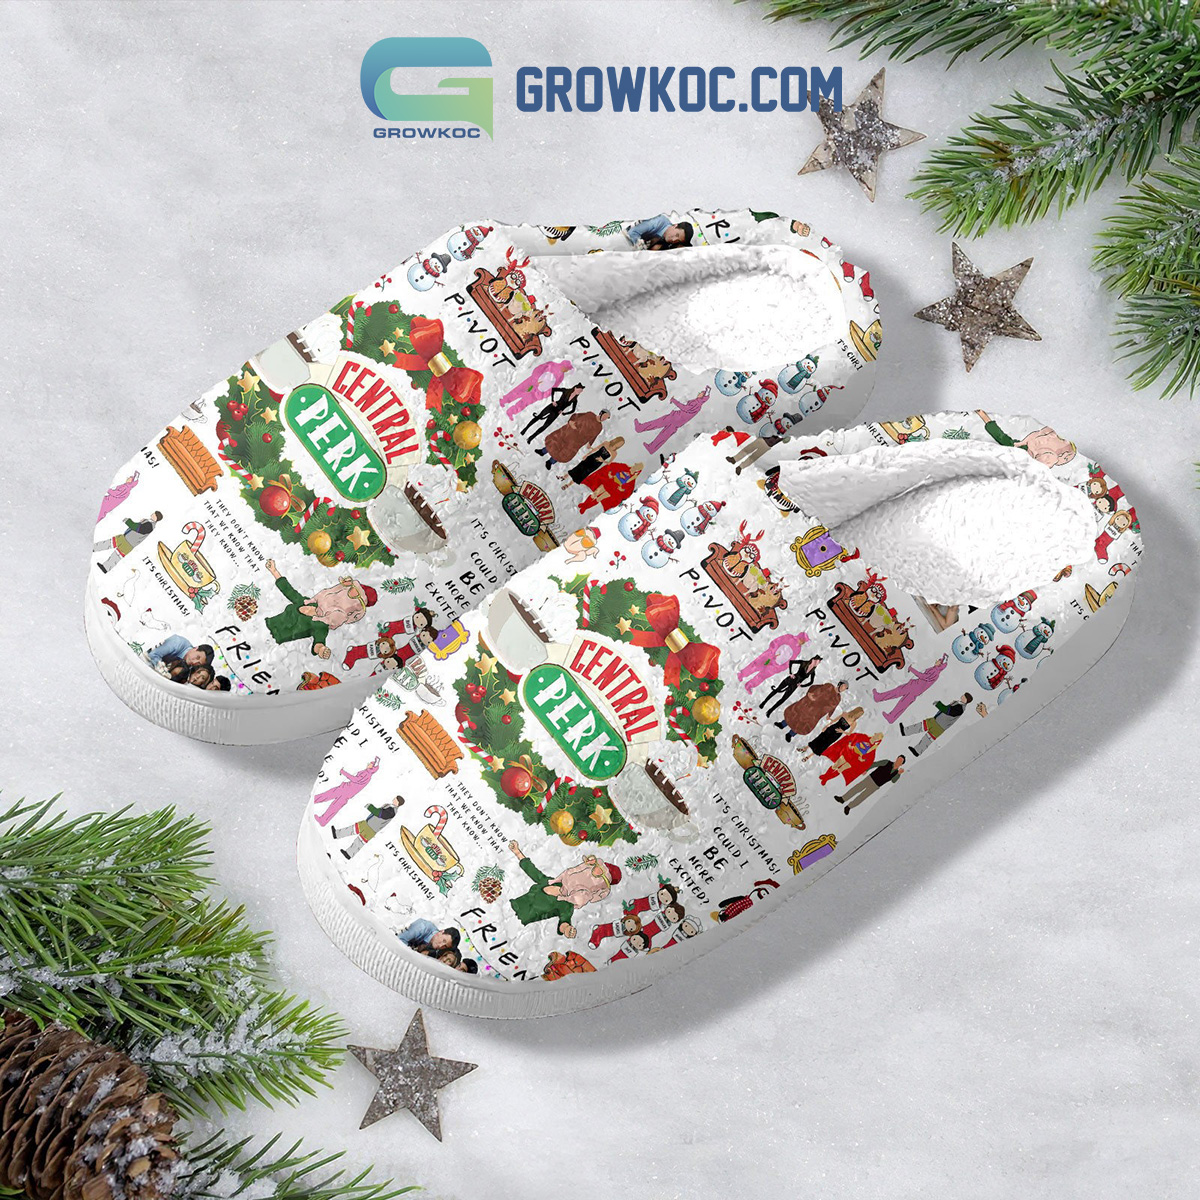 https://growkoc.com/wp-content/uploads/2023/11/Friend-Sitcom-TV-Series-Central-Perk-Pivot-Christmas-I-Could-Be-More-Excited-House-Slippers2B1-dDqIb.jpg